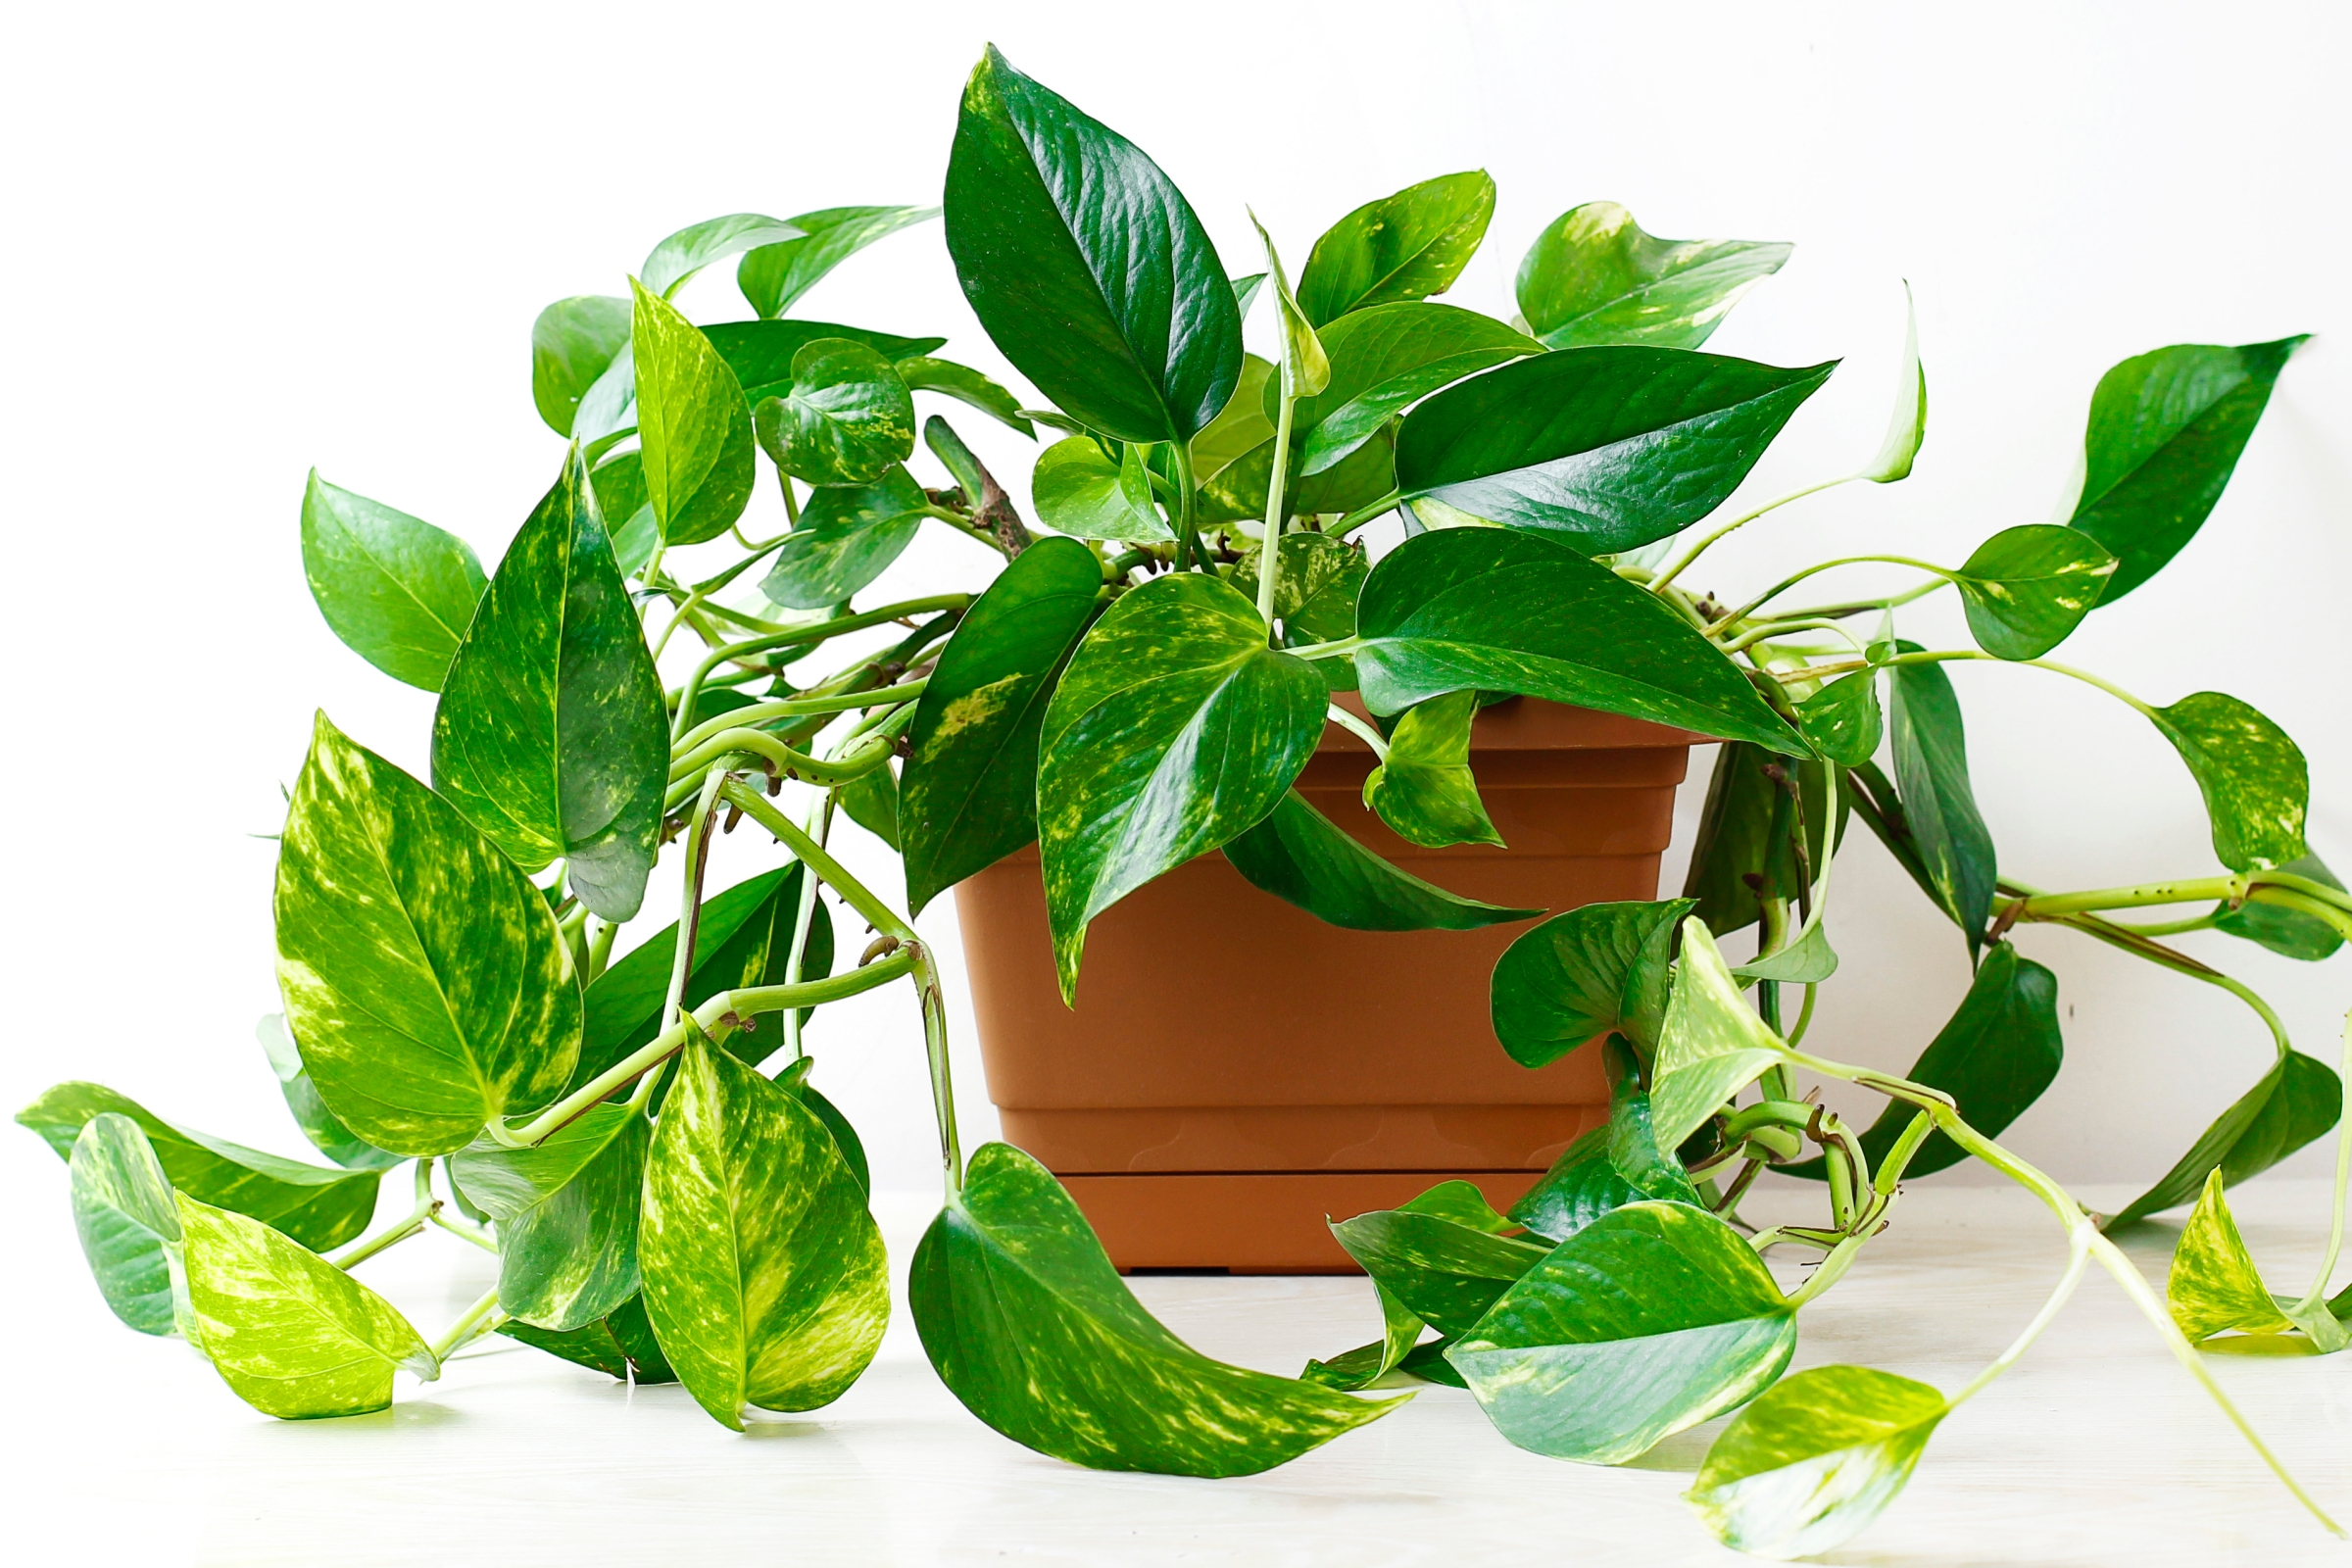 Pothos: How to Care for Golden Pothos Plants | The Old Farmer's Almanac